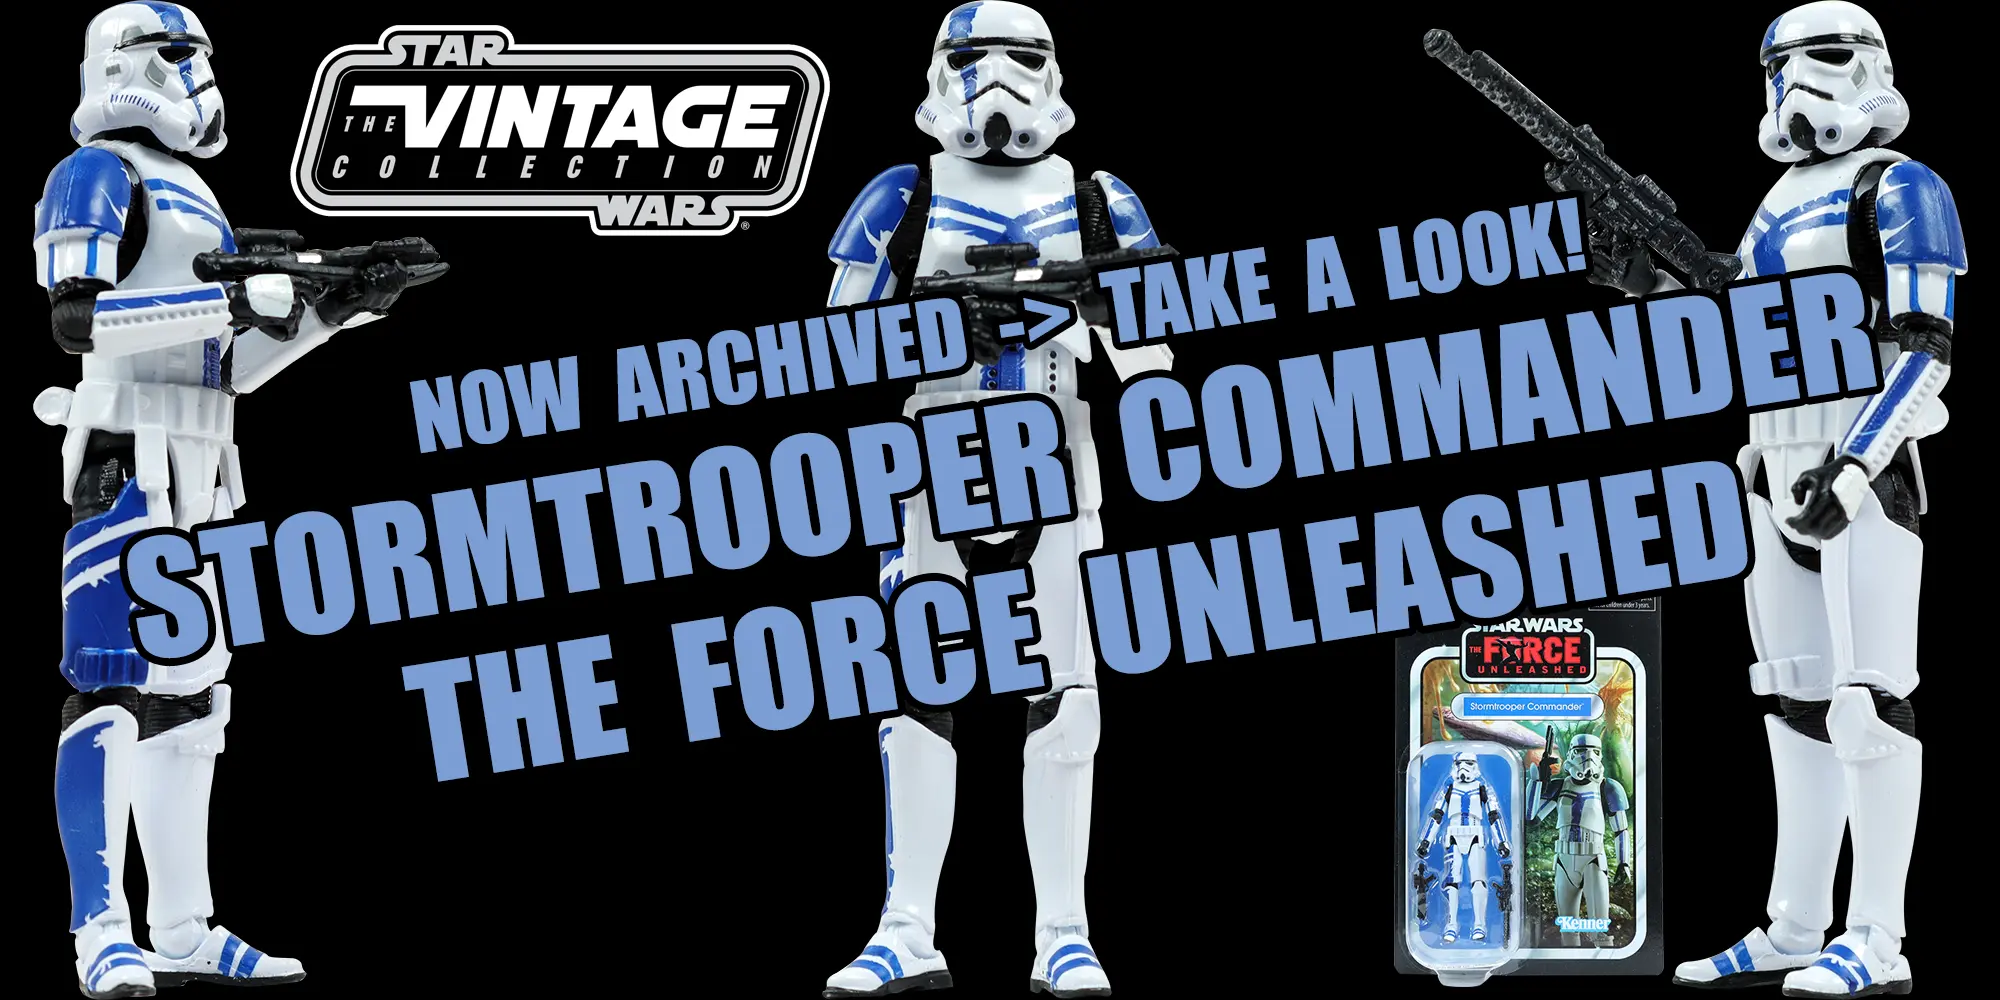 TVC Stormtrooper Commander (The Force Unleashed) Added - Check It Out!